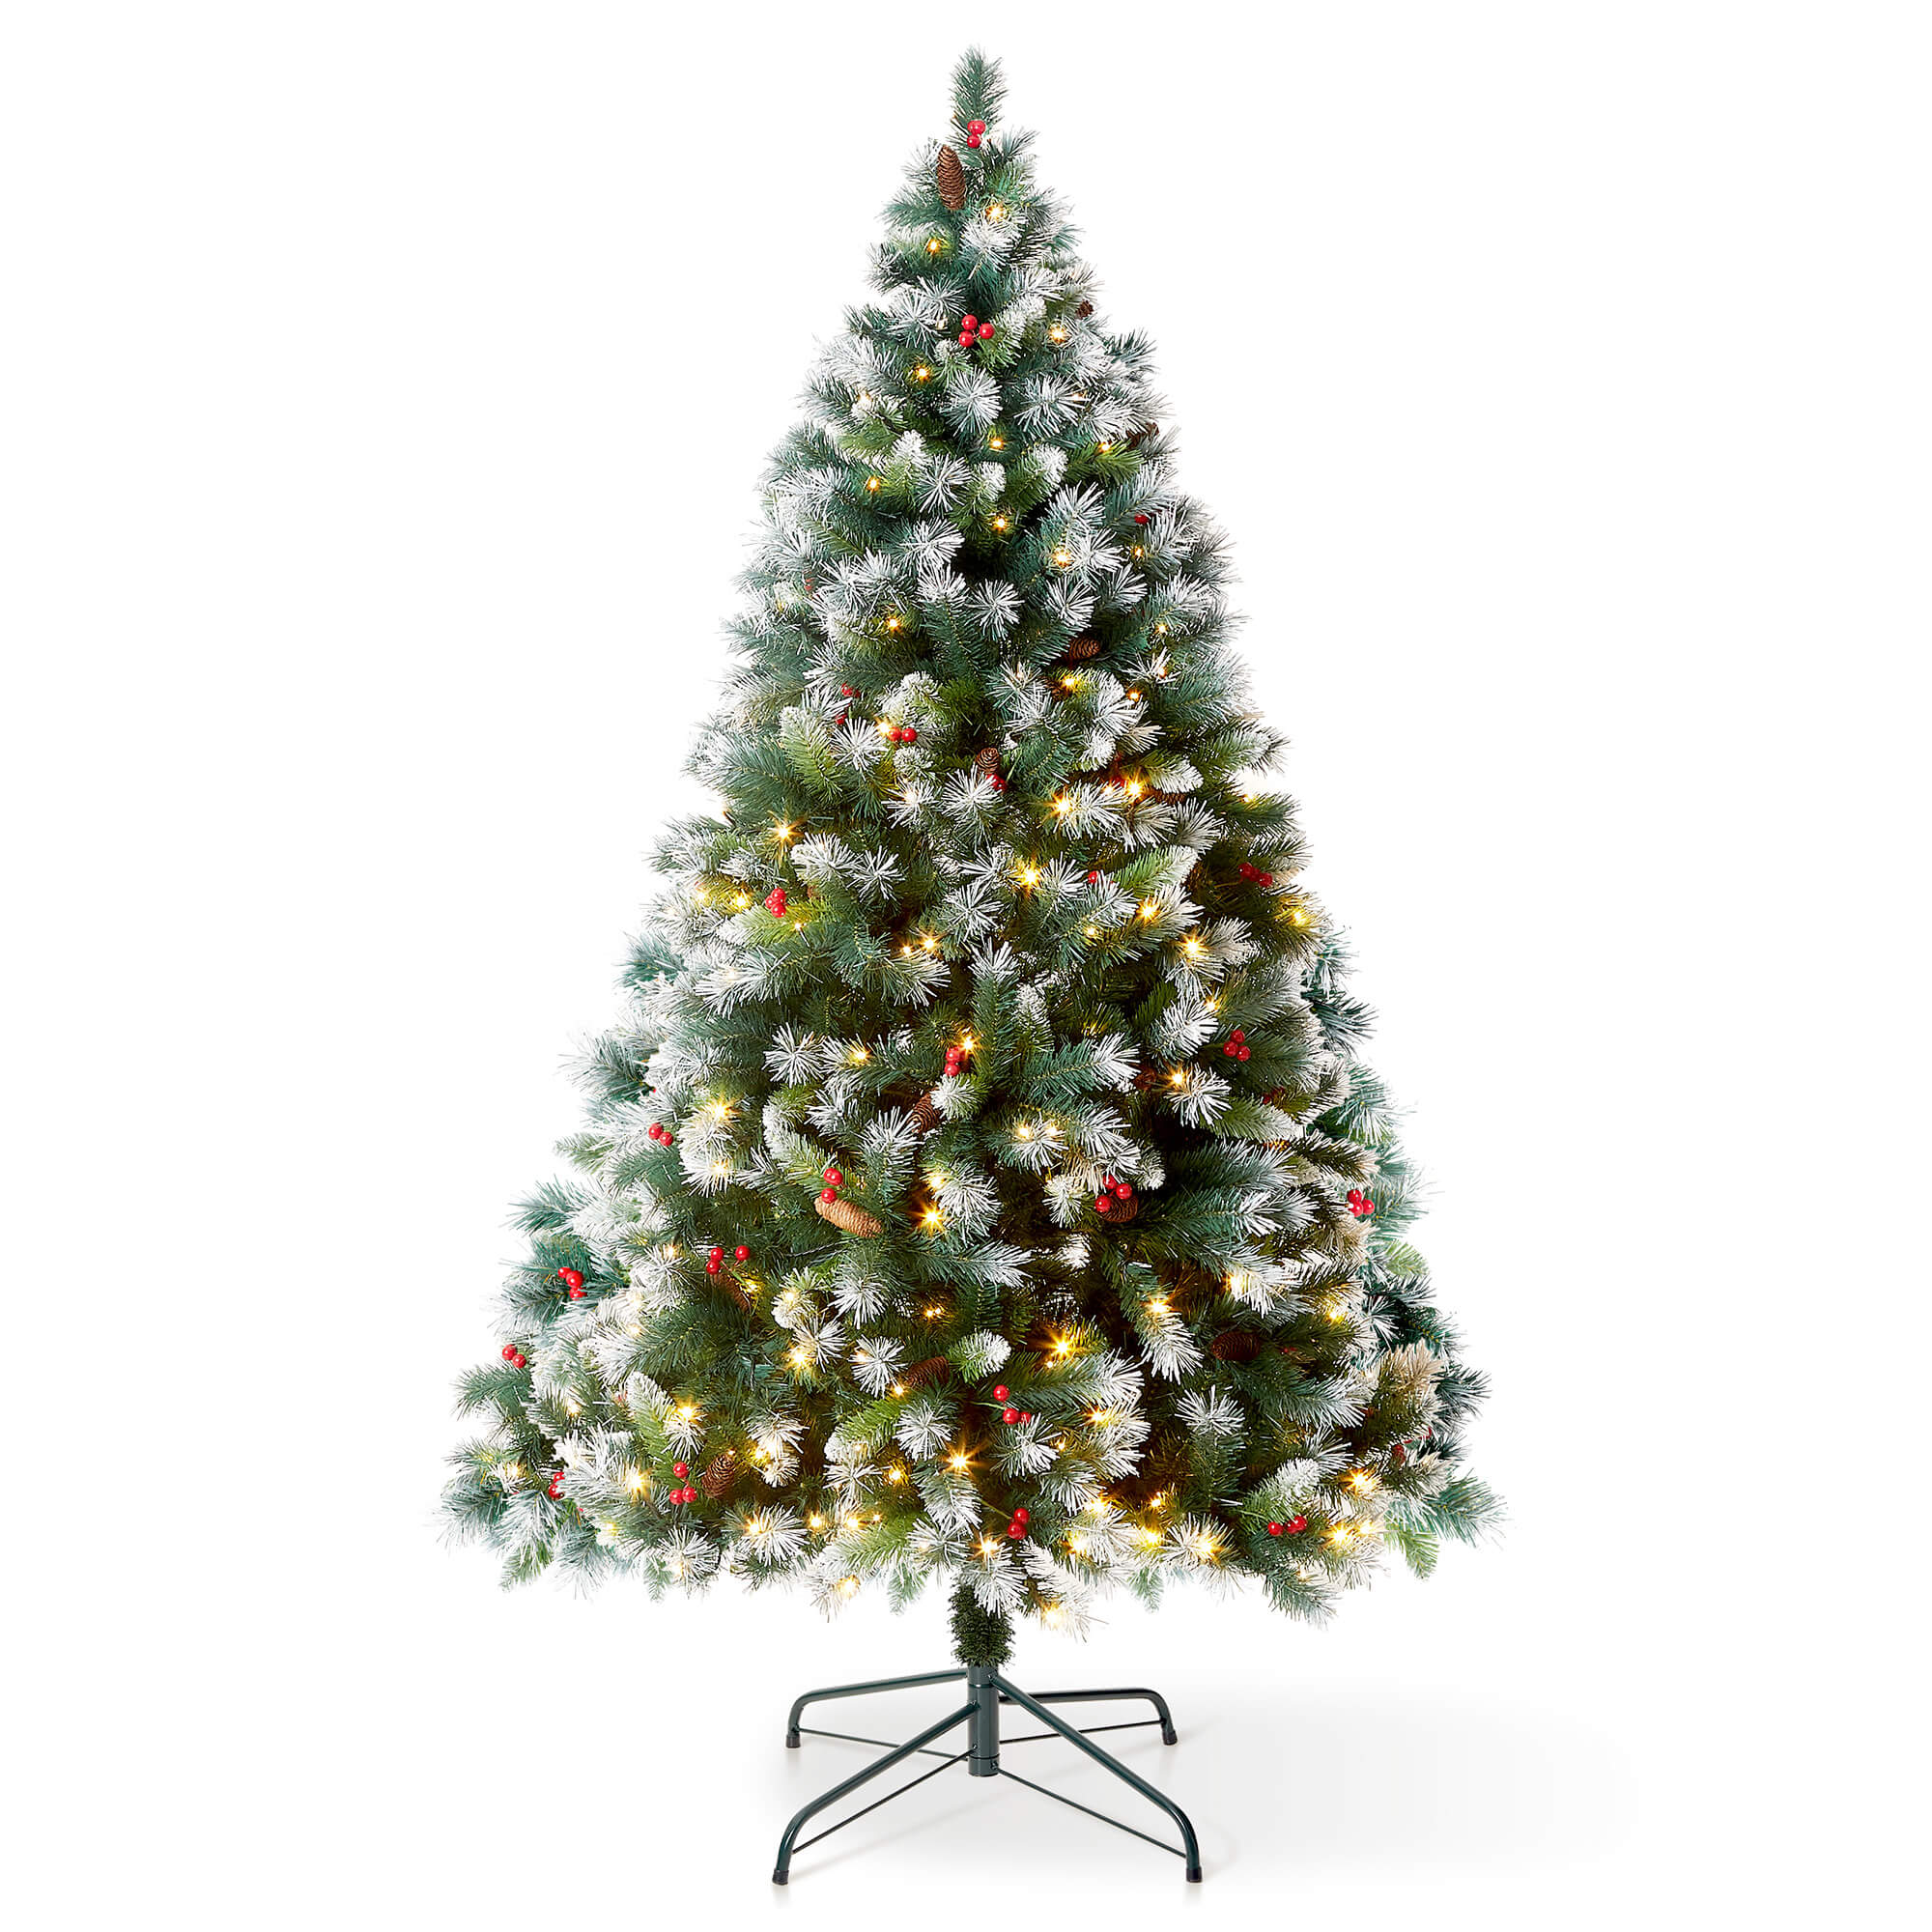 VeryMerry 5FT 'Claudia' Pre-Lit Christmas Tree with 200 Built-In Warm White LED Lights with Auto-Off Timer, 8 Lighting Modes, Decorative Pinecones and Berries